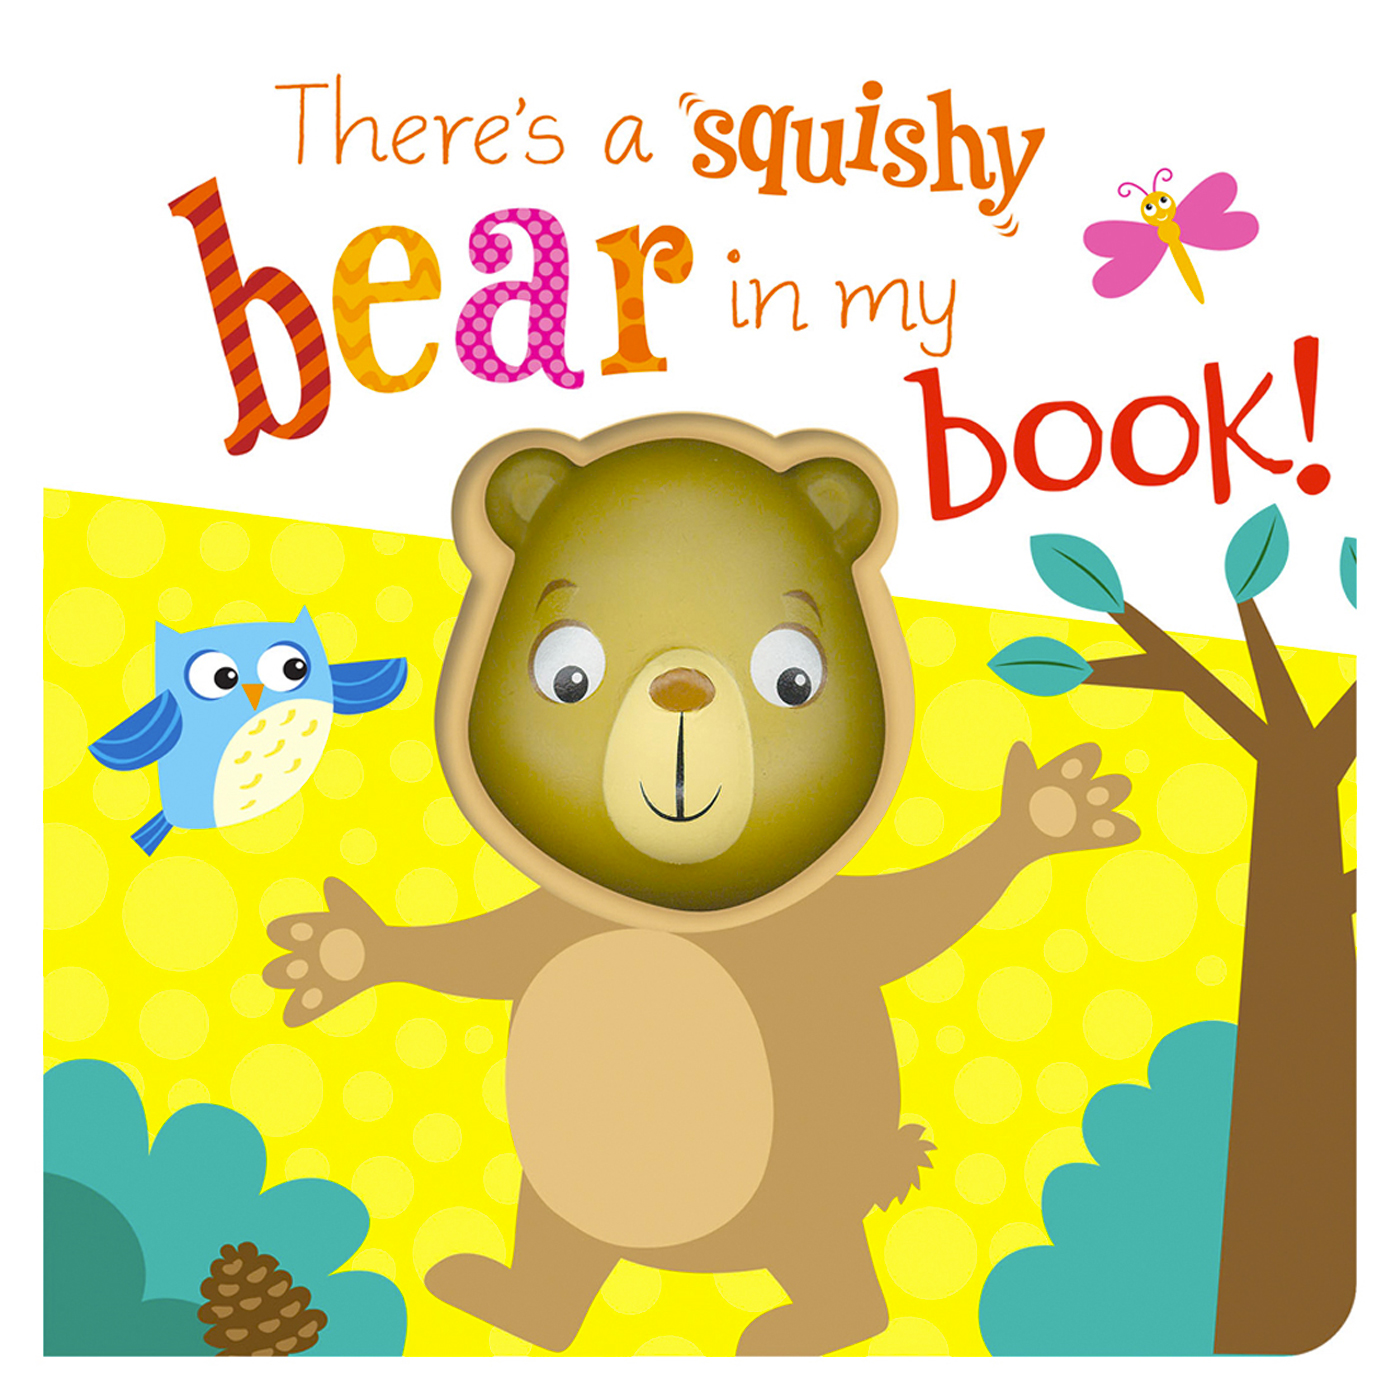  There's A Squishy Bear In My Book!